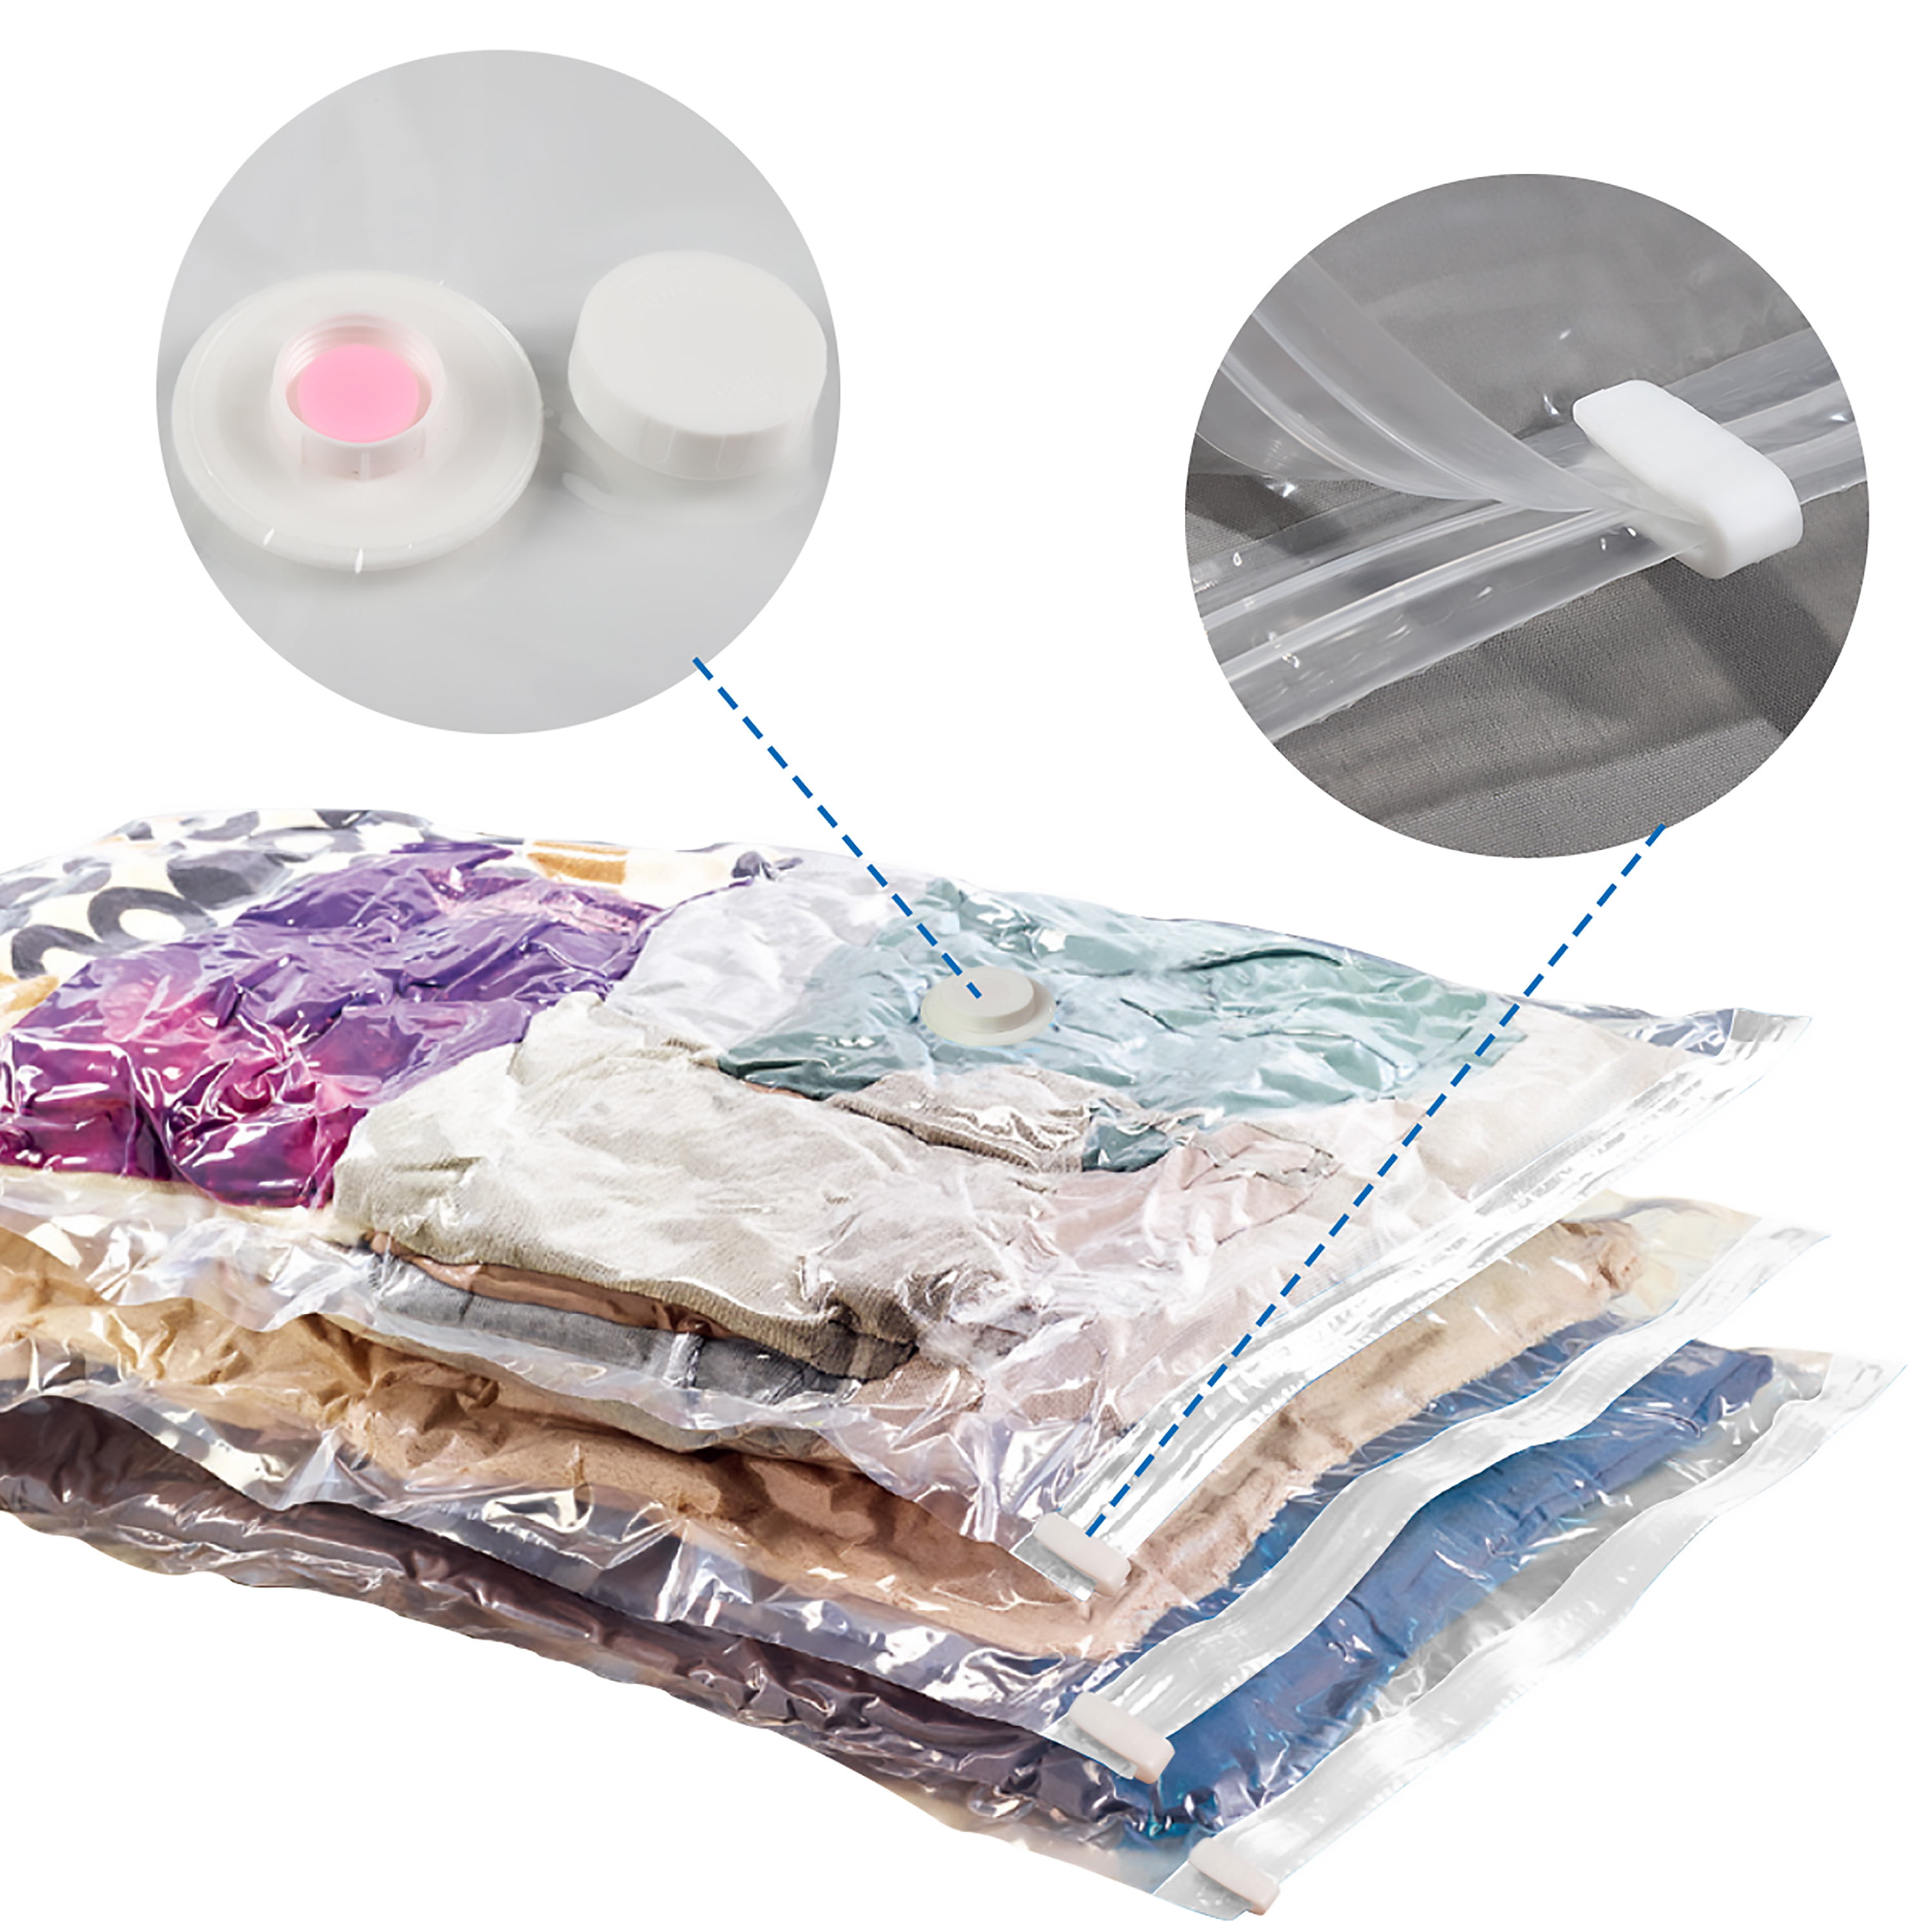 20-Pack Vacuum Storage Bags $19.99 (See Them in Action in The